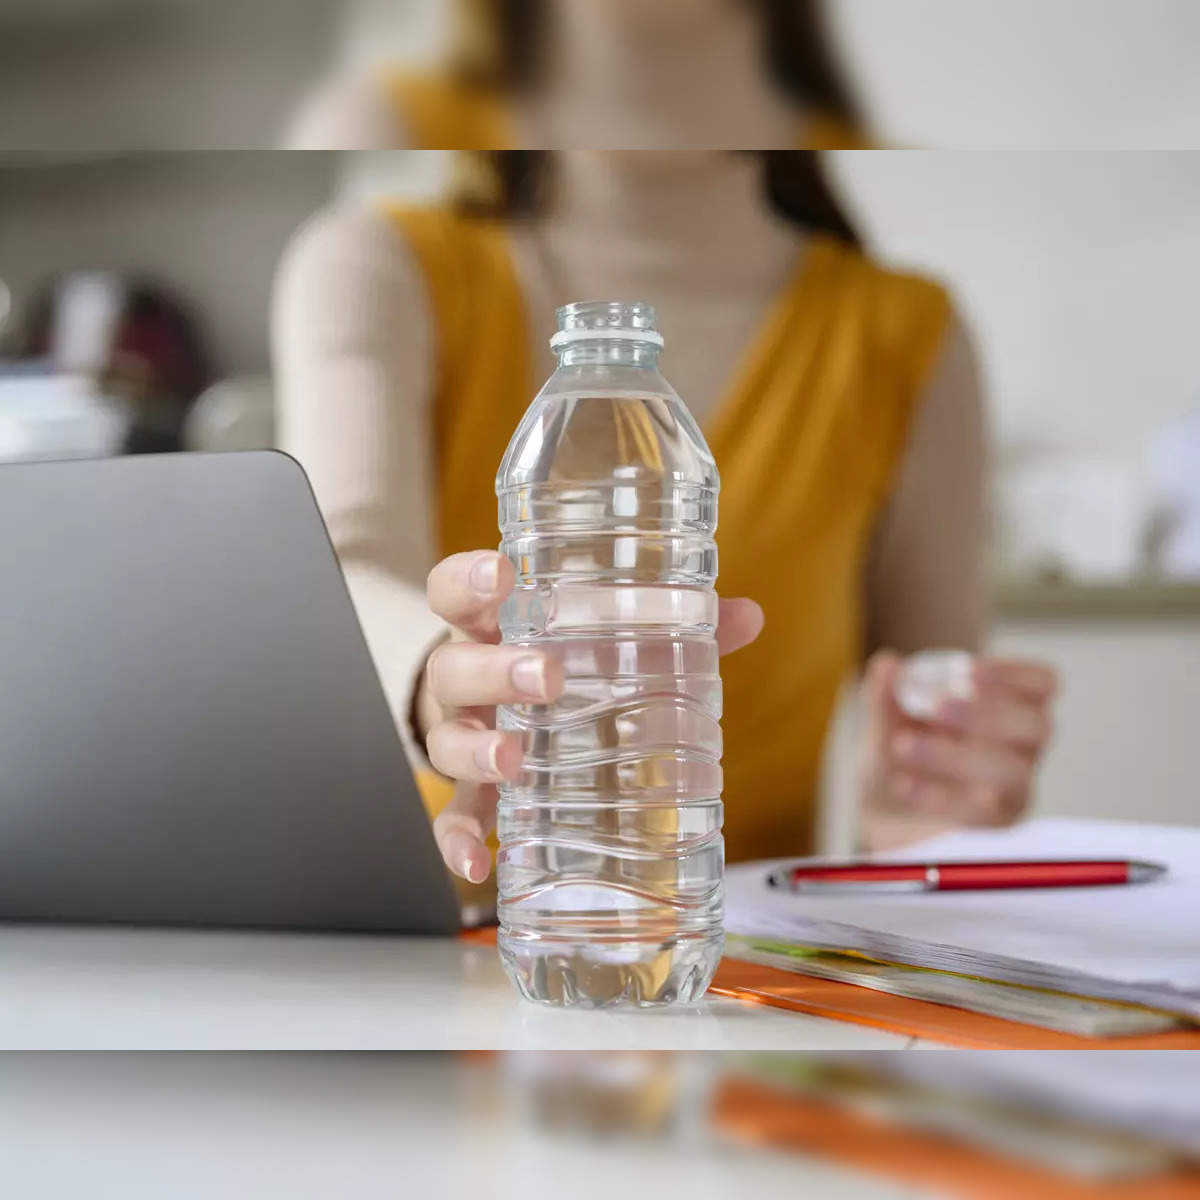 Should You Worry About Plastic Particles In Bottled Water?